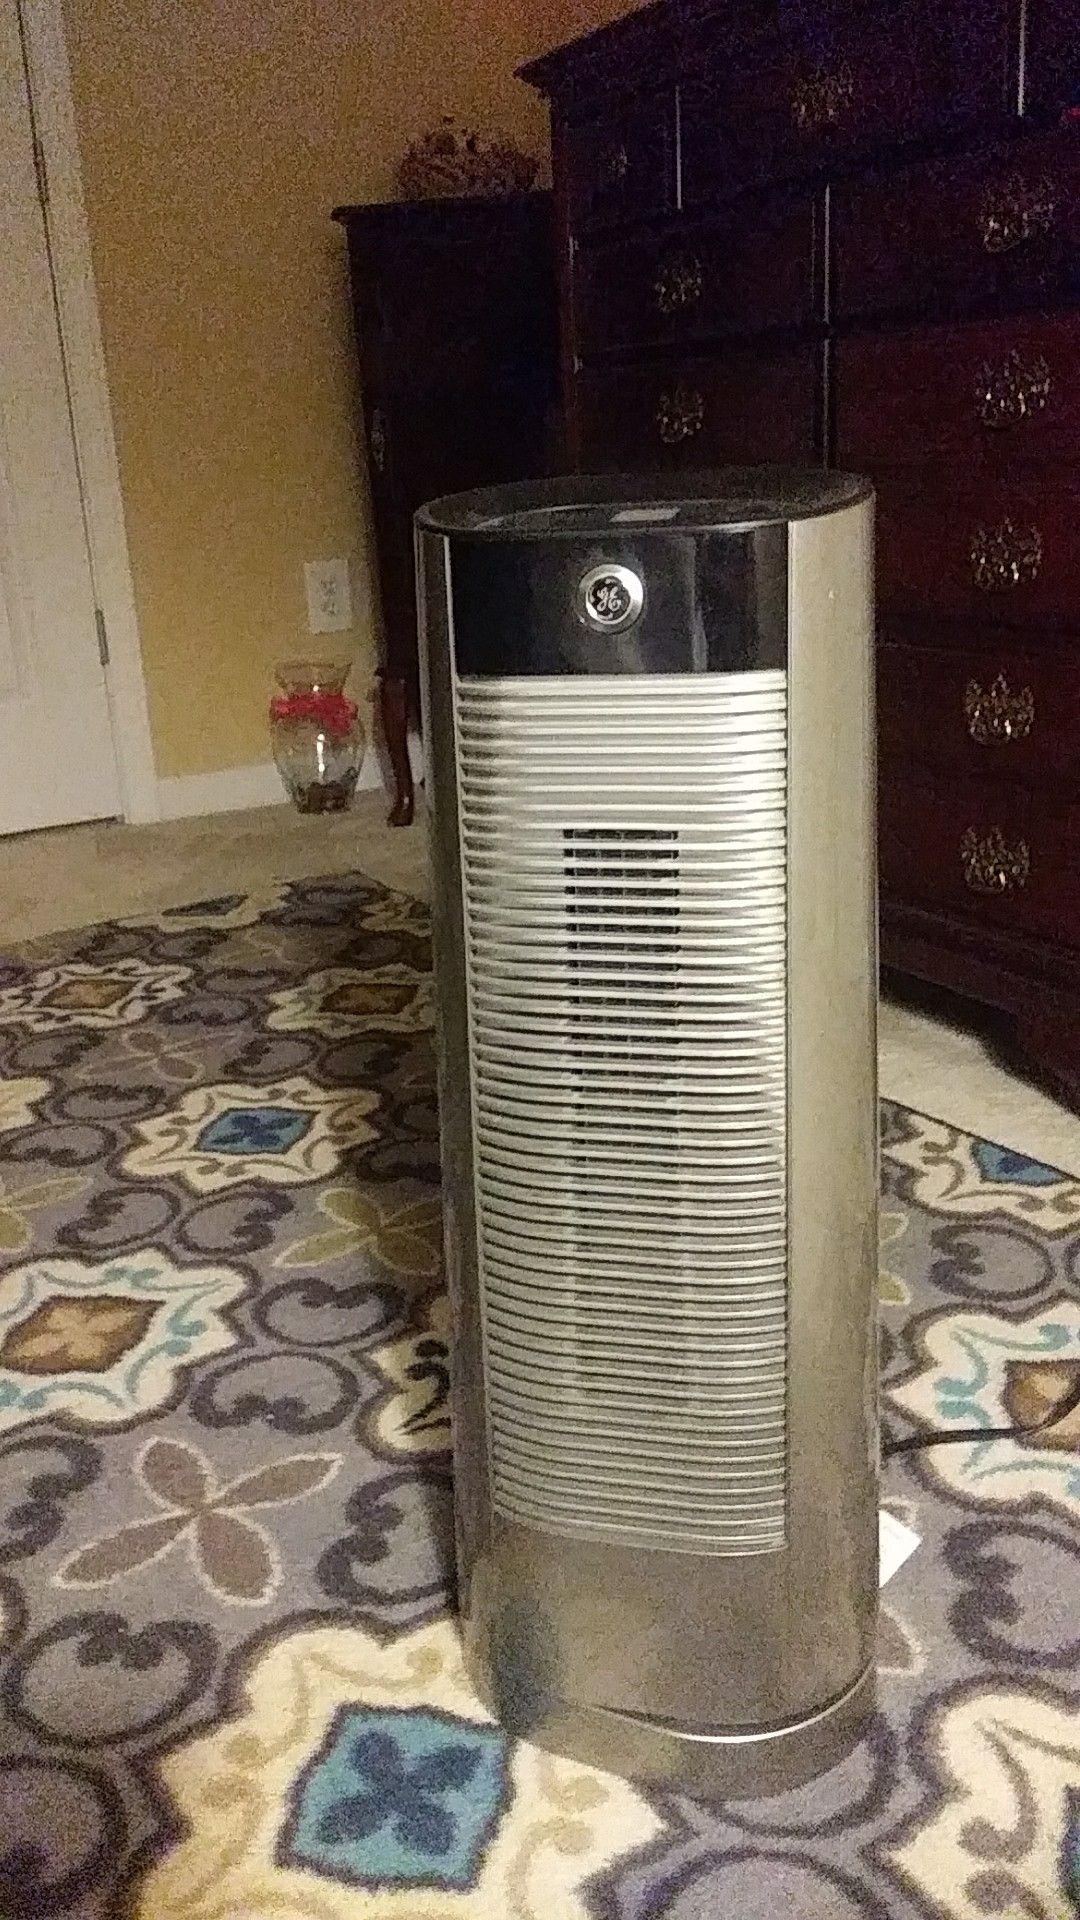 2 - Standing Fan & Heater in one. Has different speeds & it oscillates